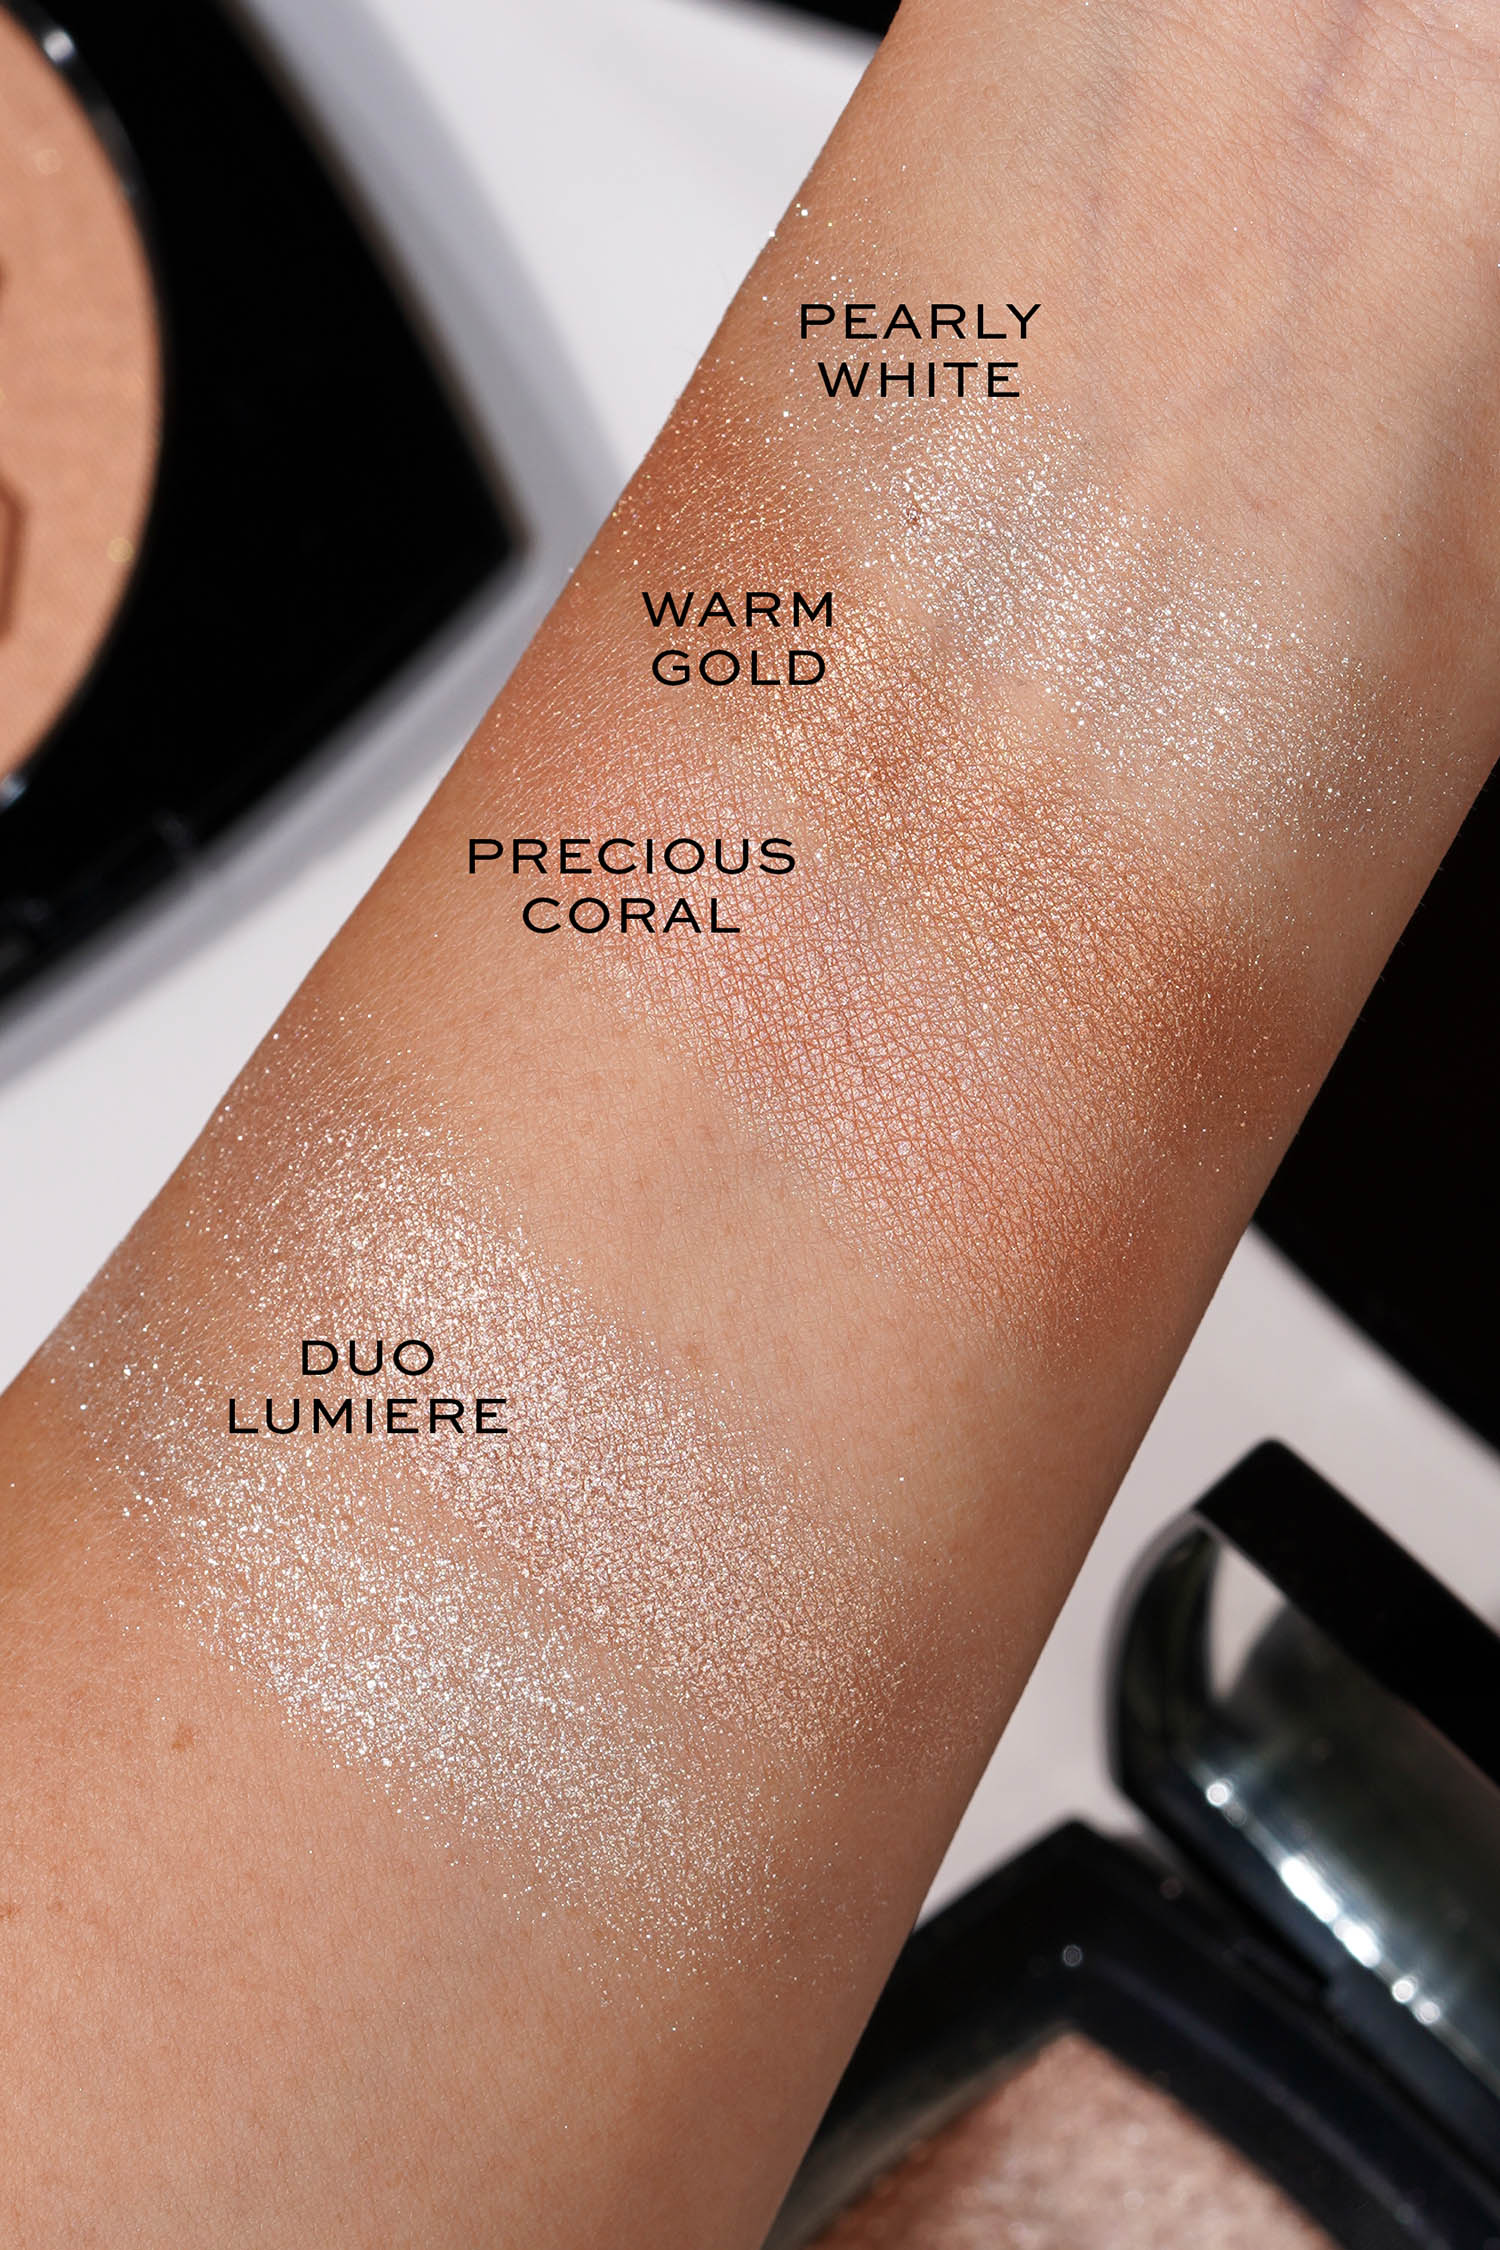 Les Symboles de Chanel Highlighters for Holiday - The Beauty Look Book